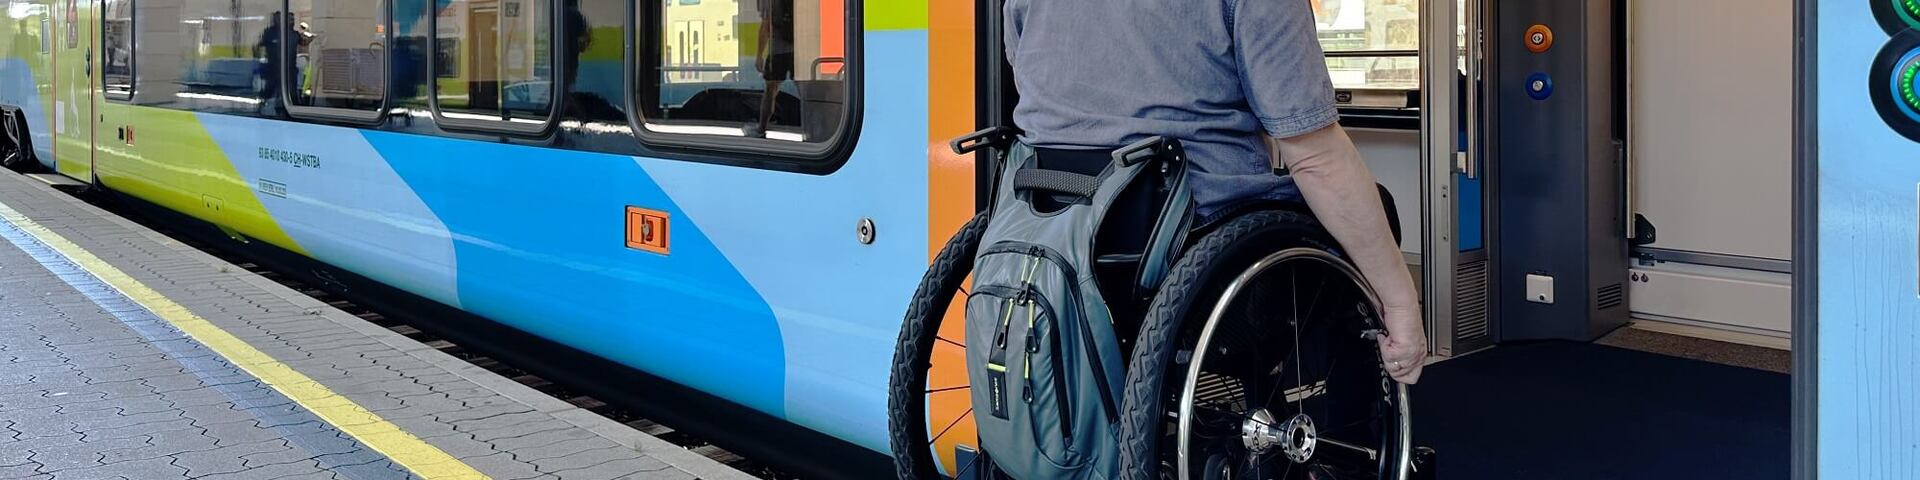 Accessibility and Passenger Assist at WESTbahn